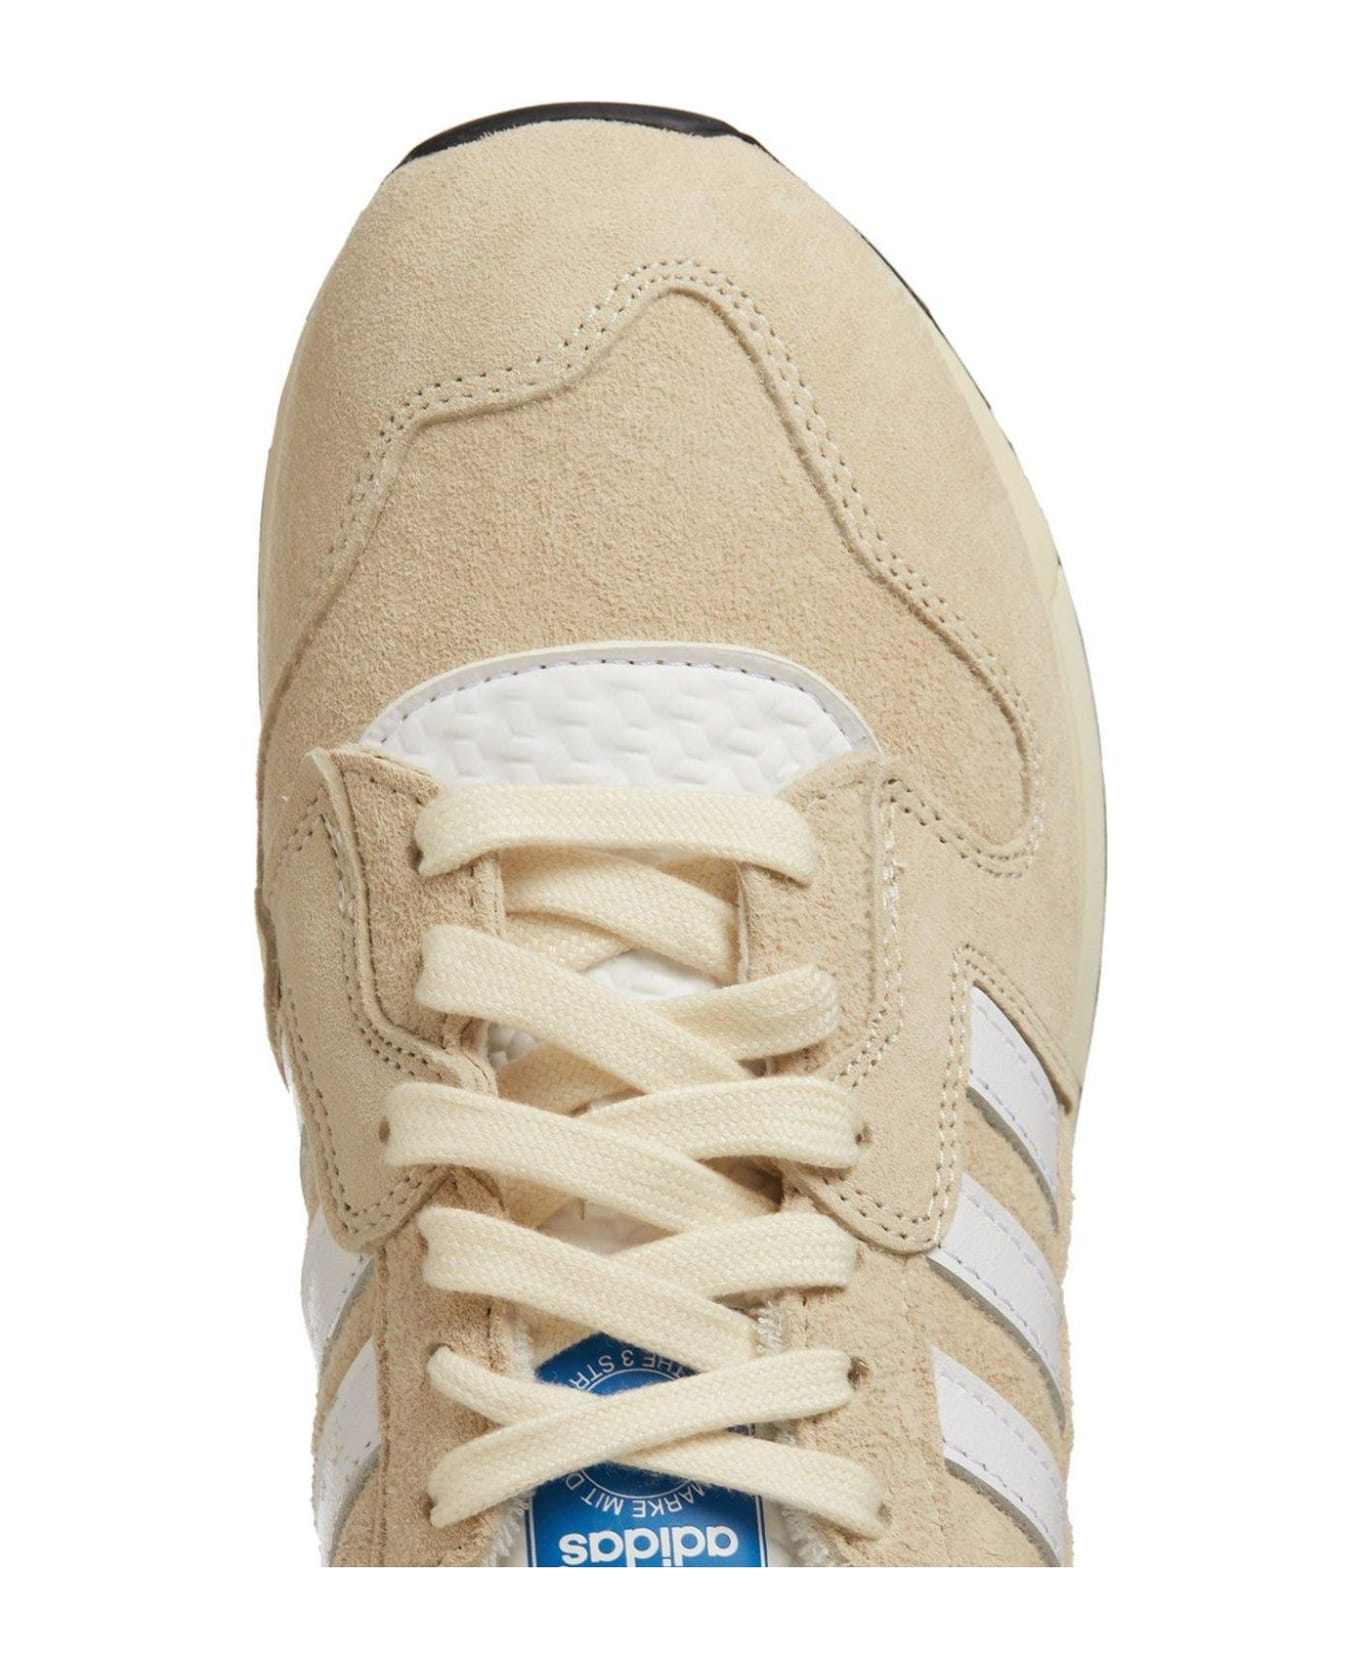 Adidas Zx 420 Low-top Sneakers - WHITE